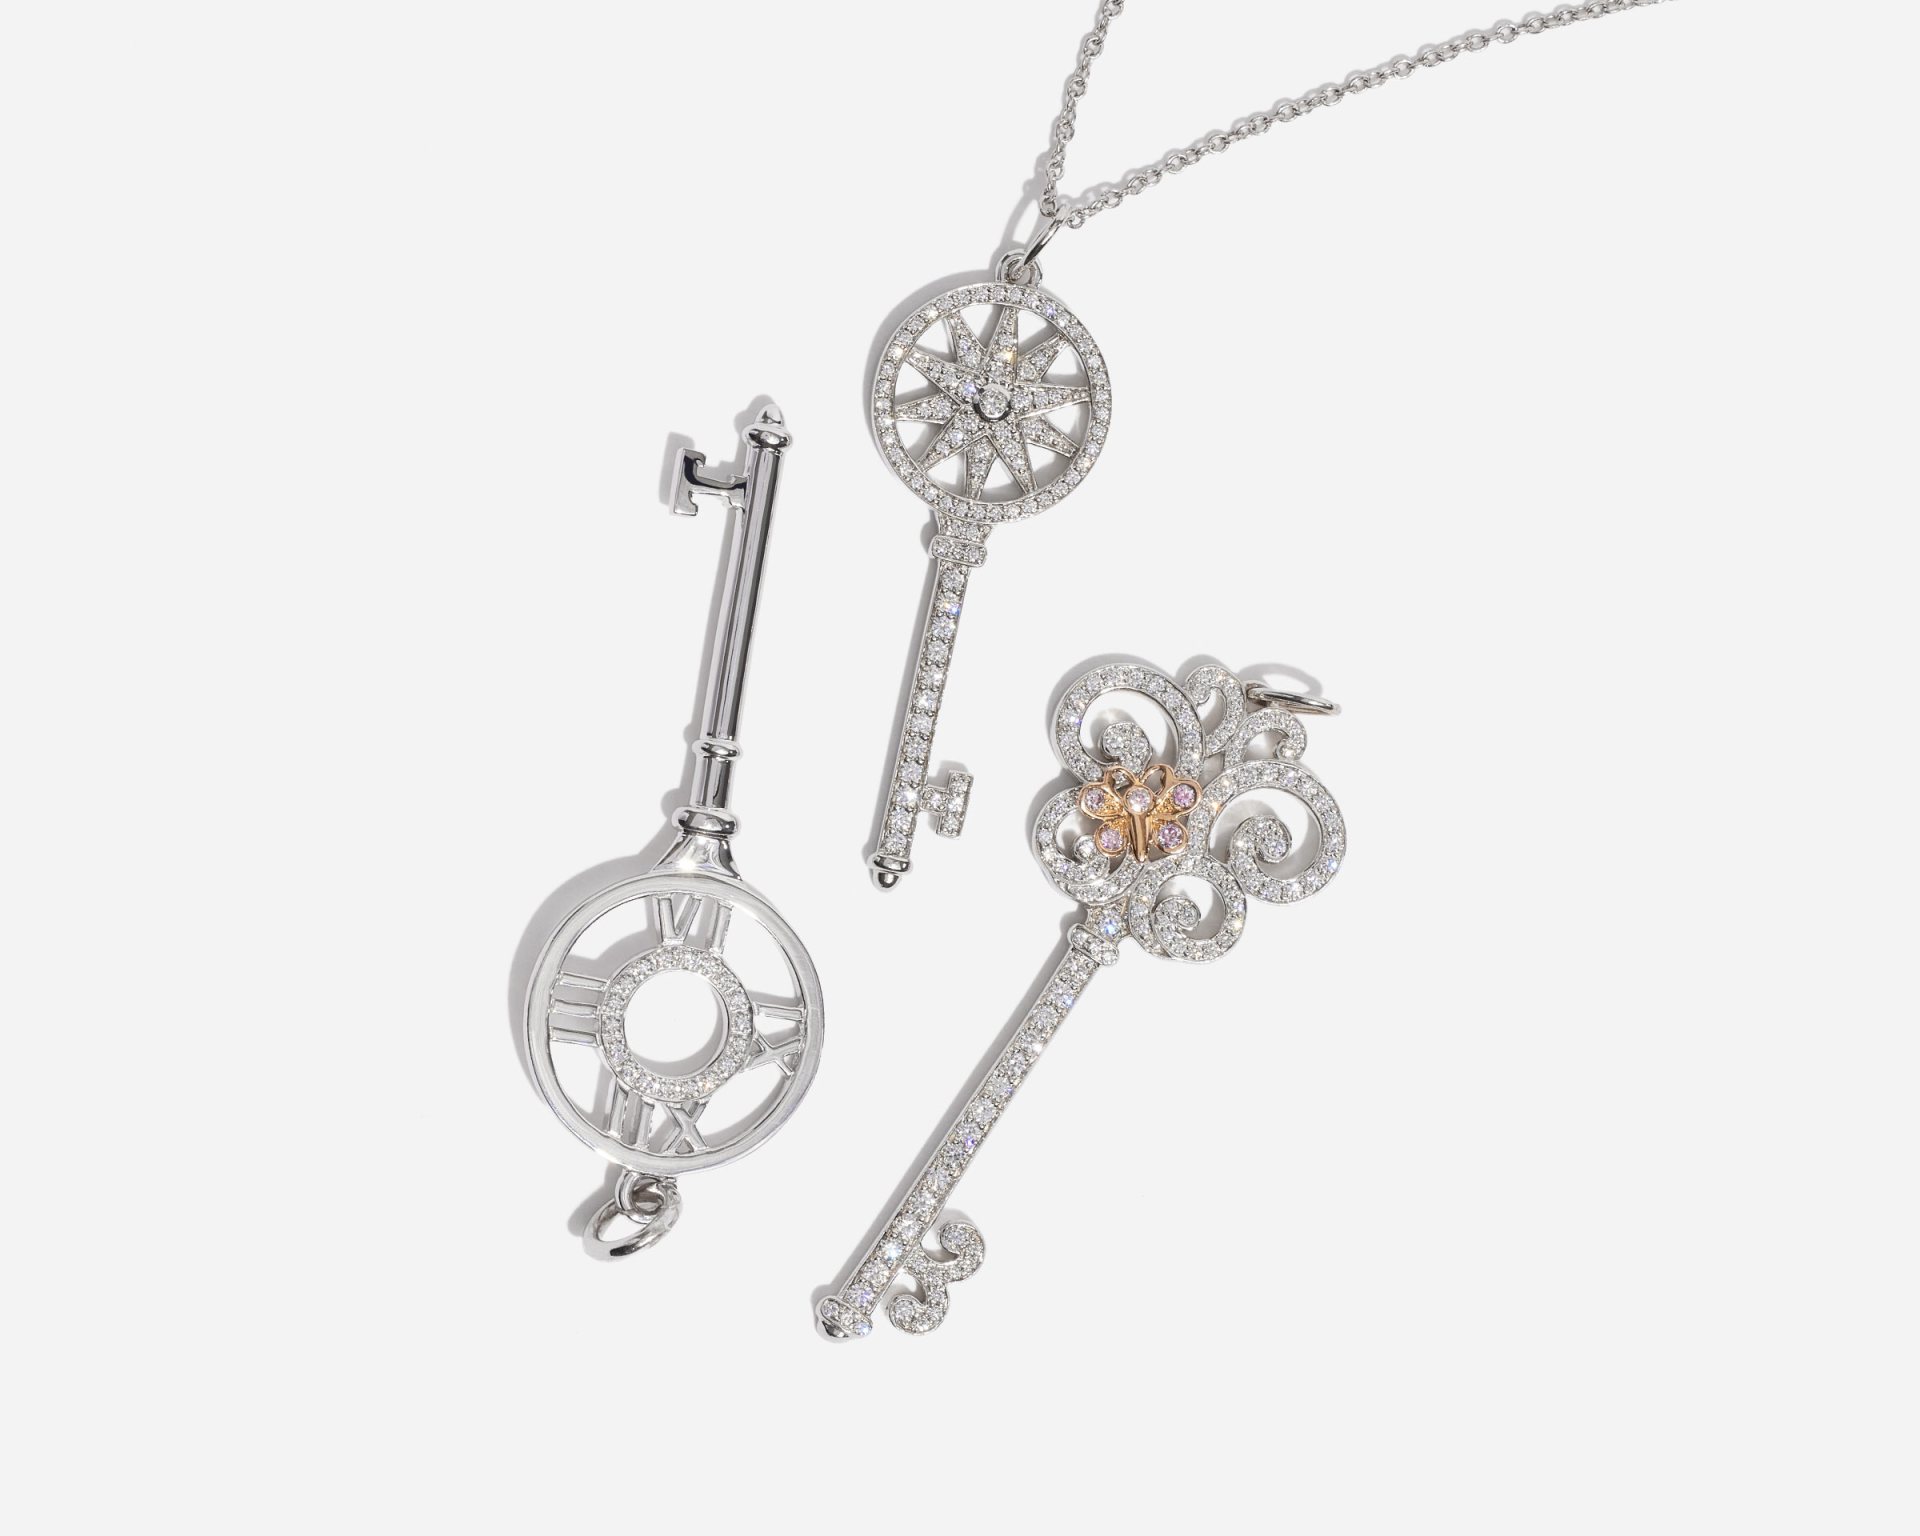 Unlocking the Meaning Behind Tiffany Key Pendants - Academy by FASHIONPHILE